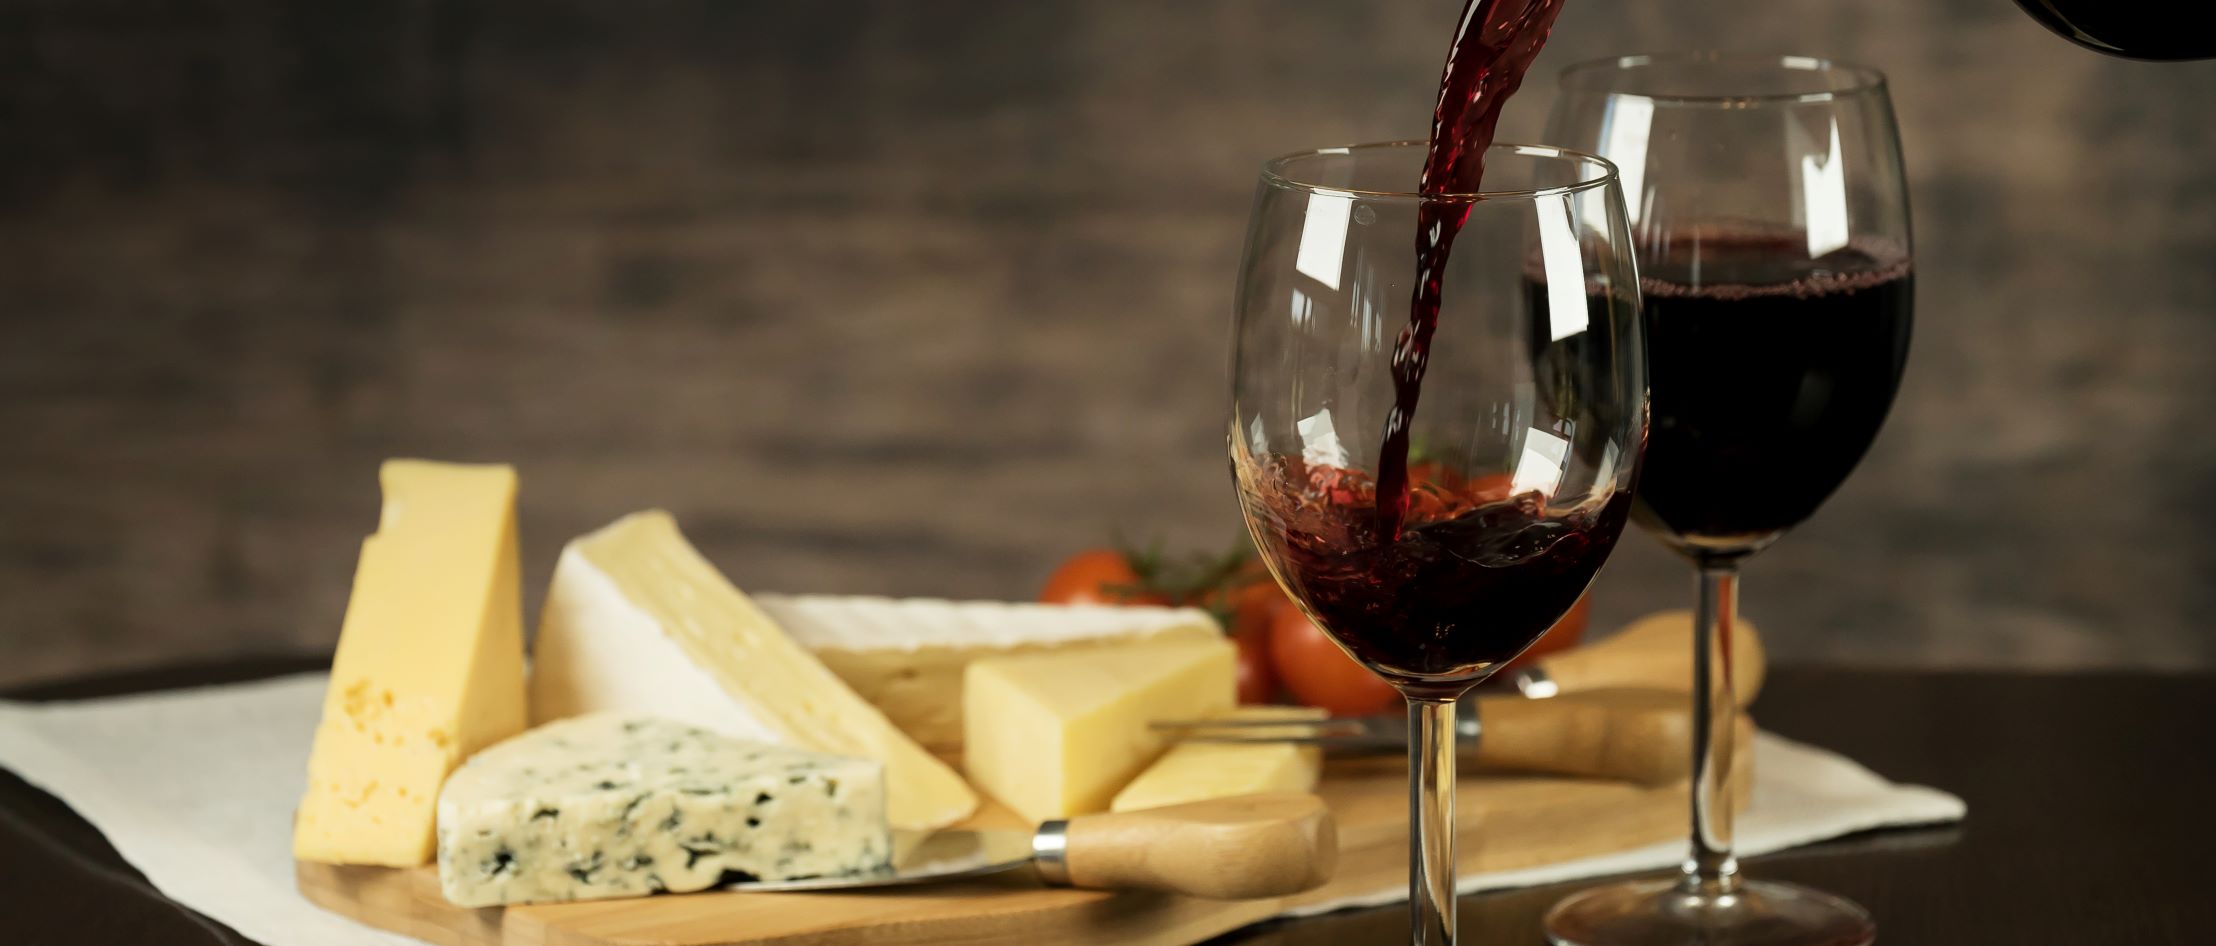 Wine + Cheese: a match made in heaven